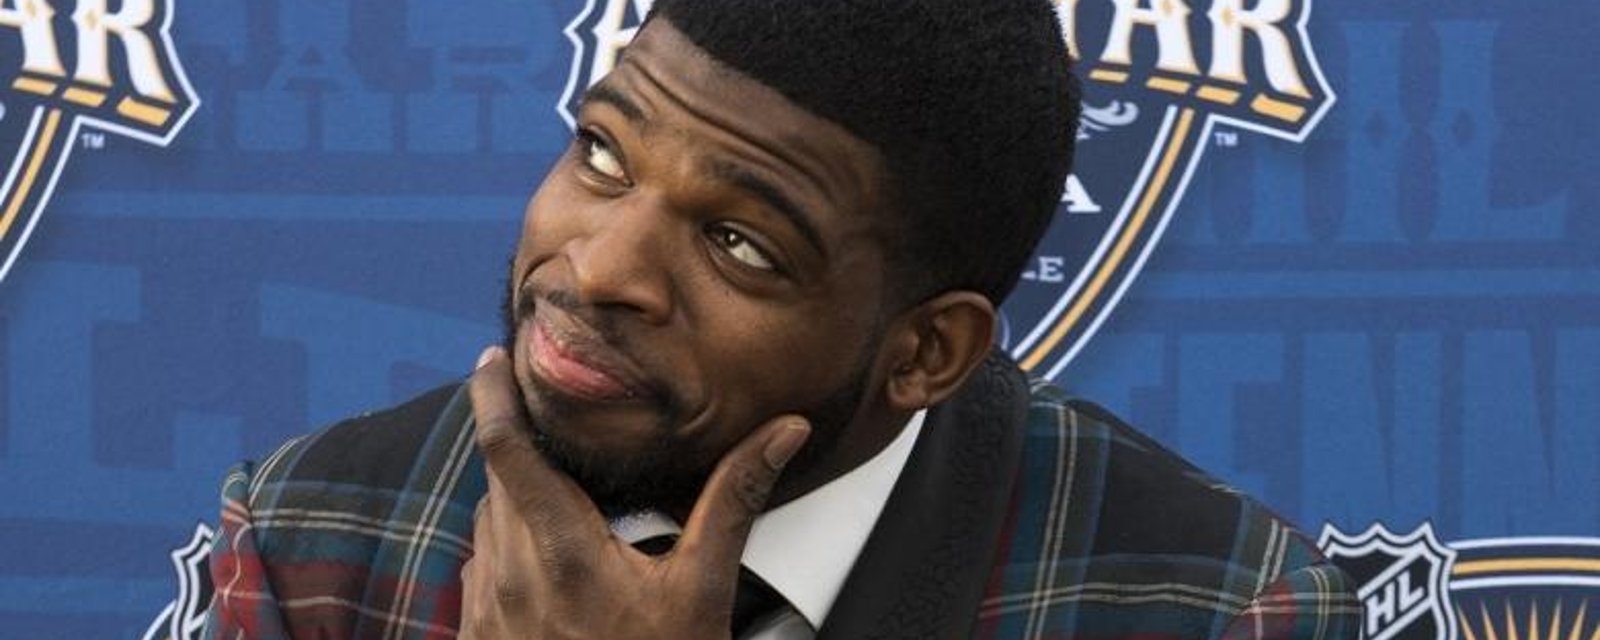 Subban reveals the Habs captain is not their real leader.